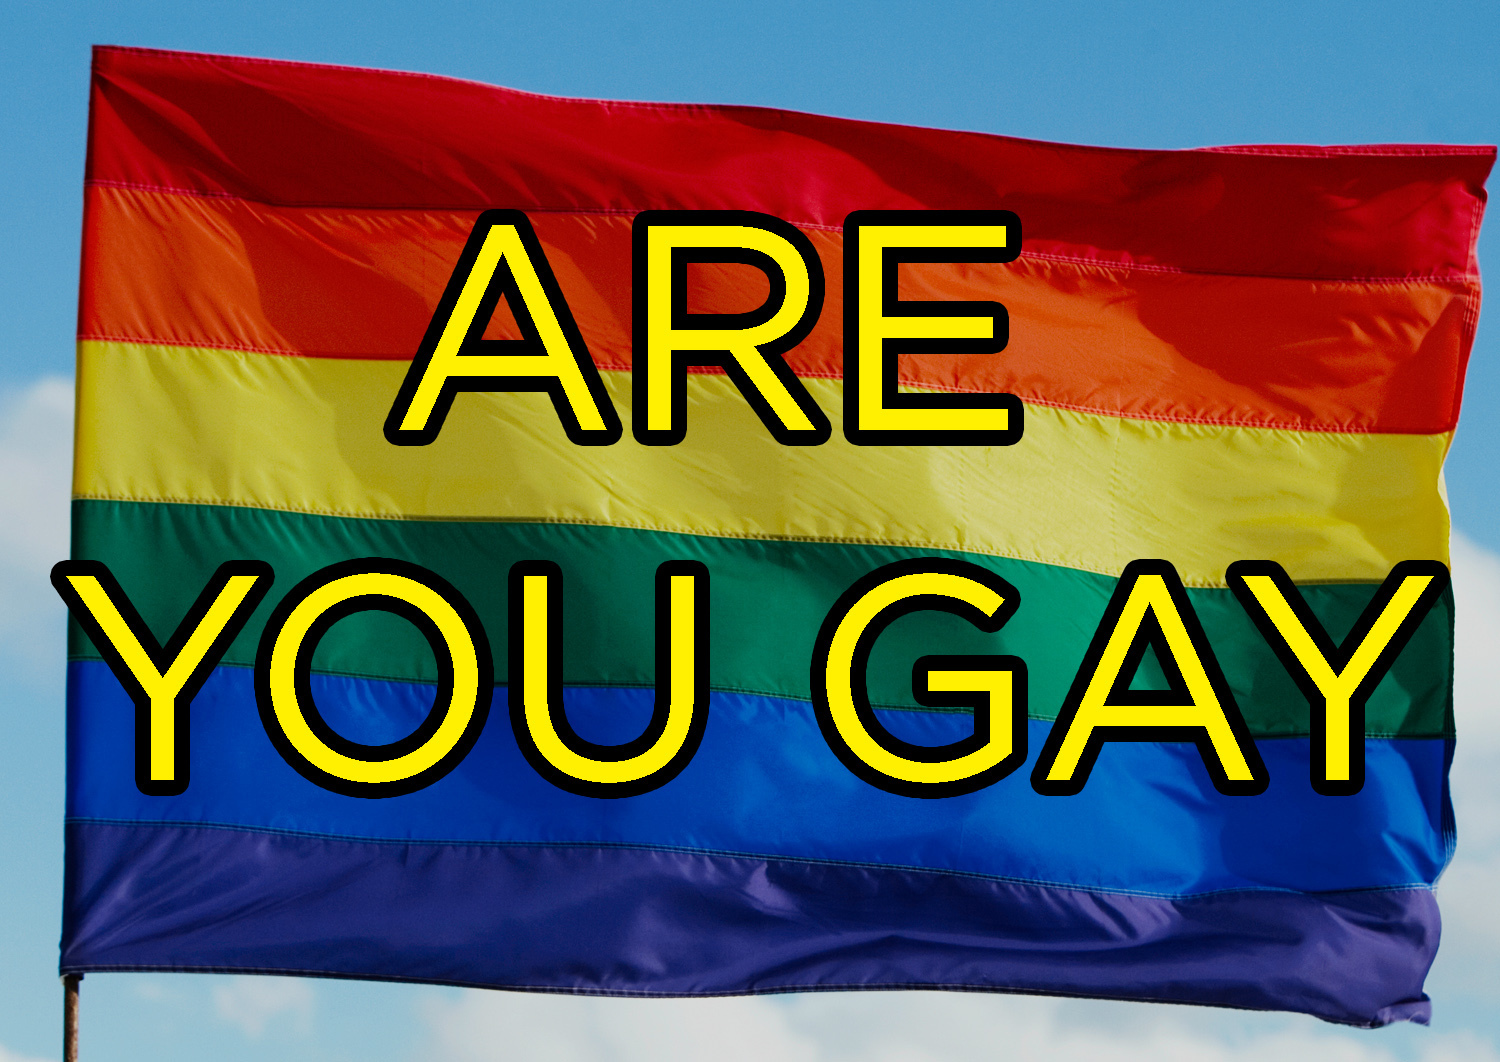 Are you gay test buzzfeed